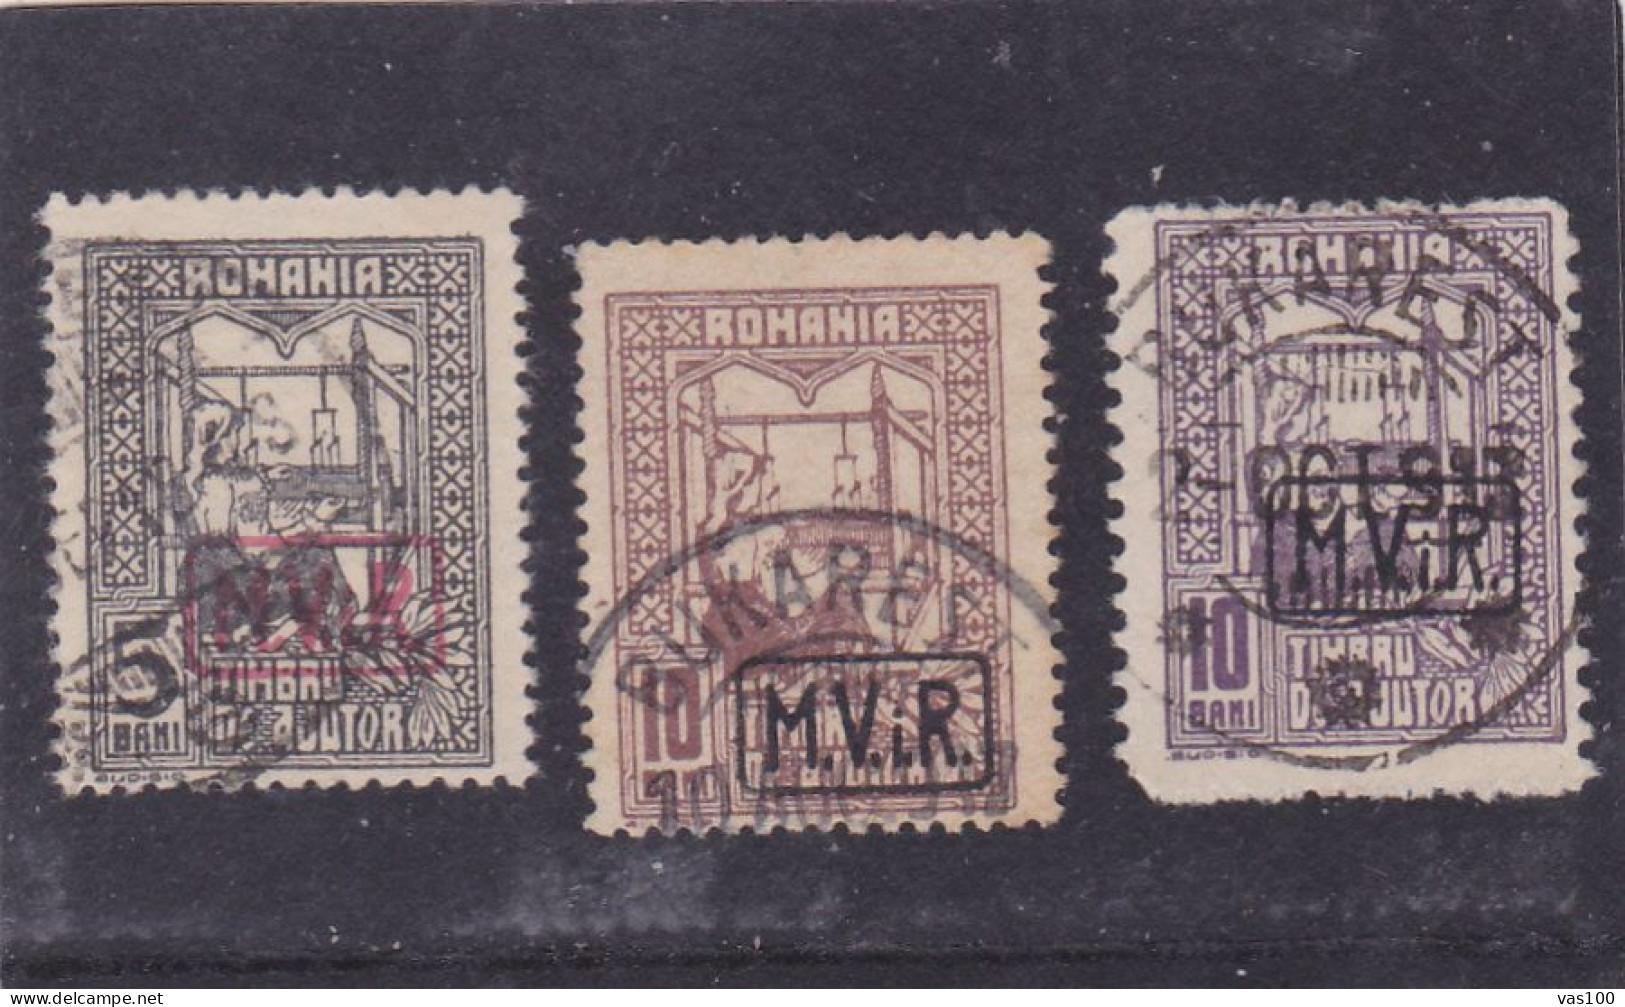 Germany WW1 Occupation In Romania 1917 MViR  3 STAMPS POSTAGE DUE USED - Occupazione